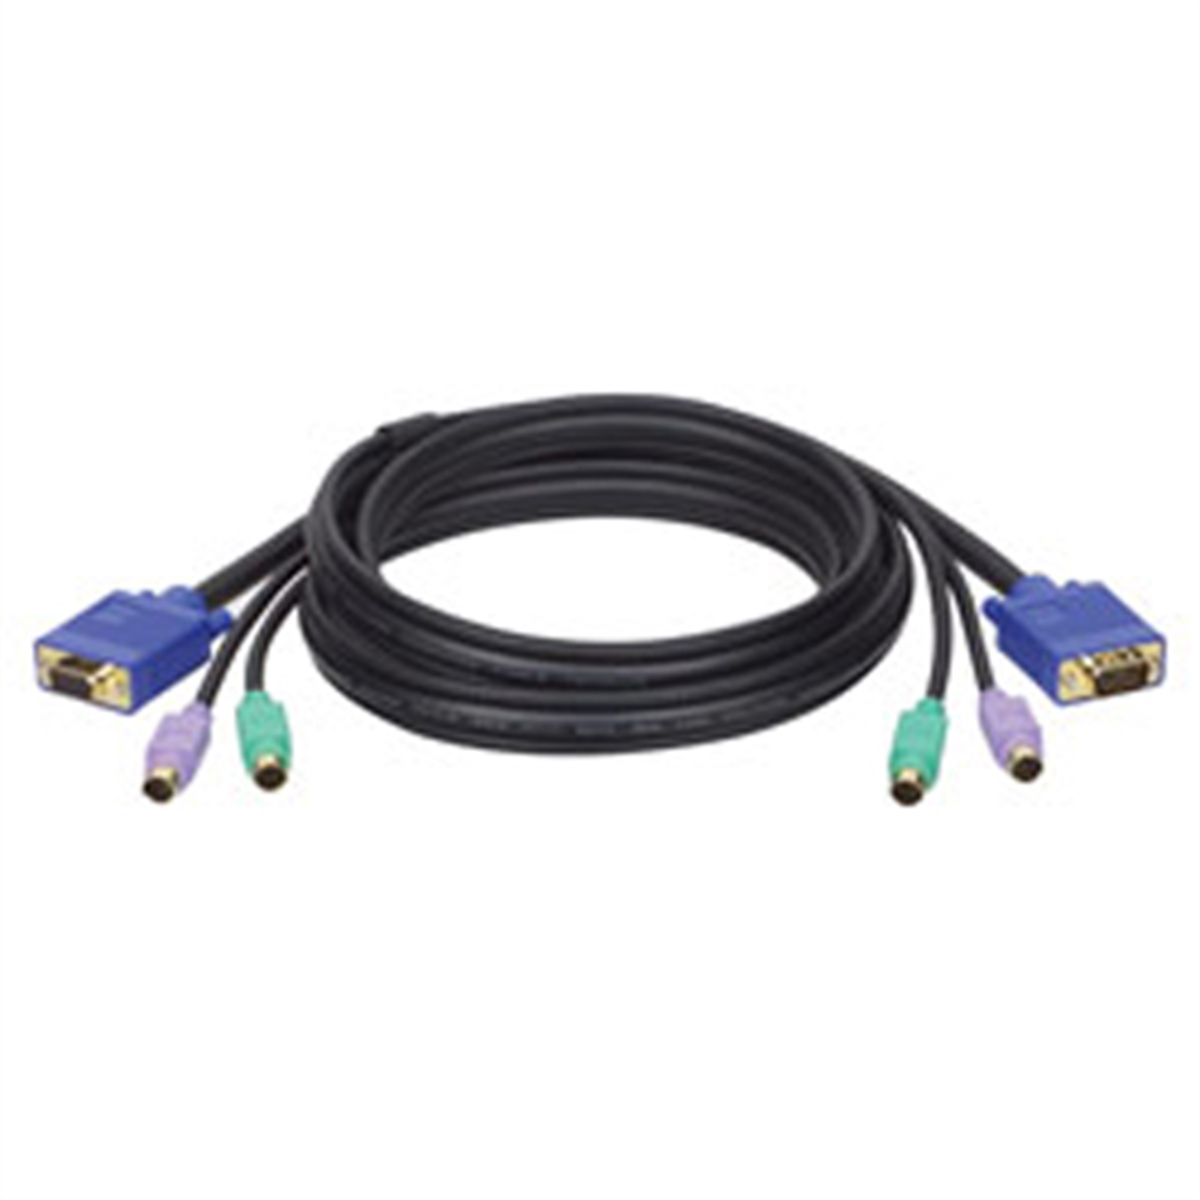 Cable for Digital Pressure & Temp Analyzer - 6 Ft